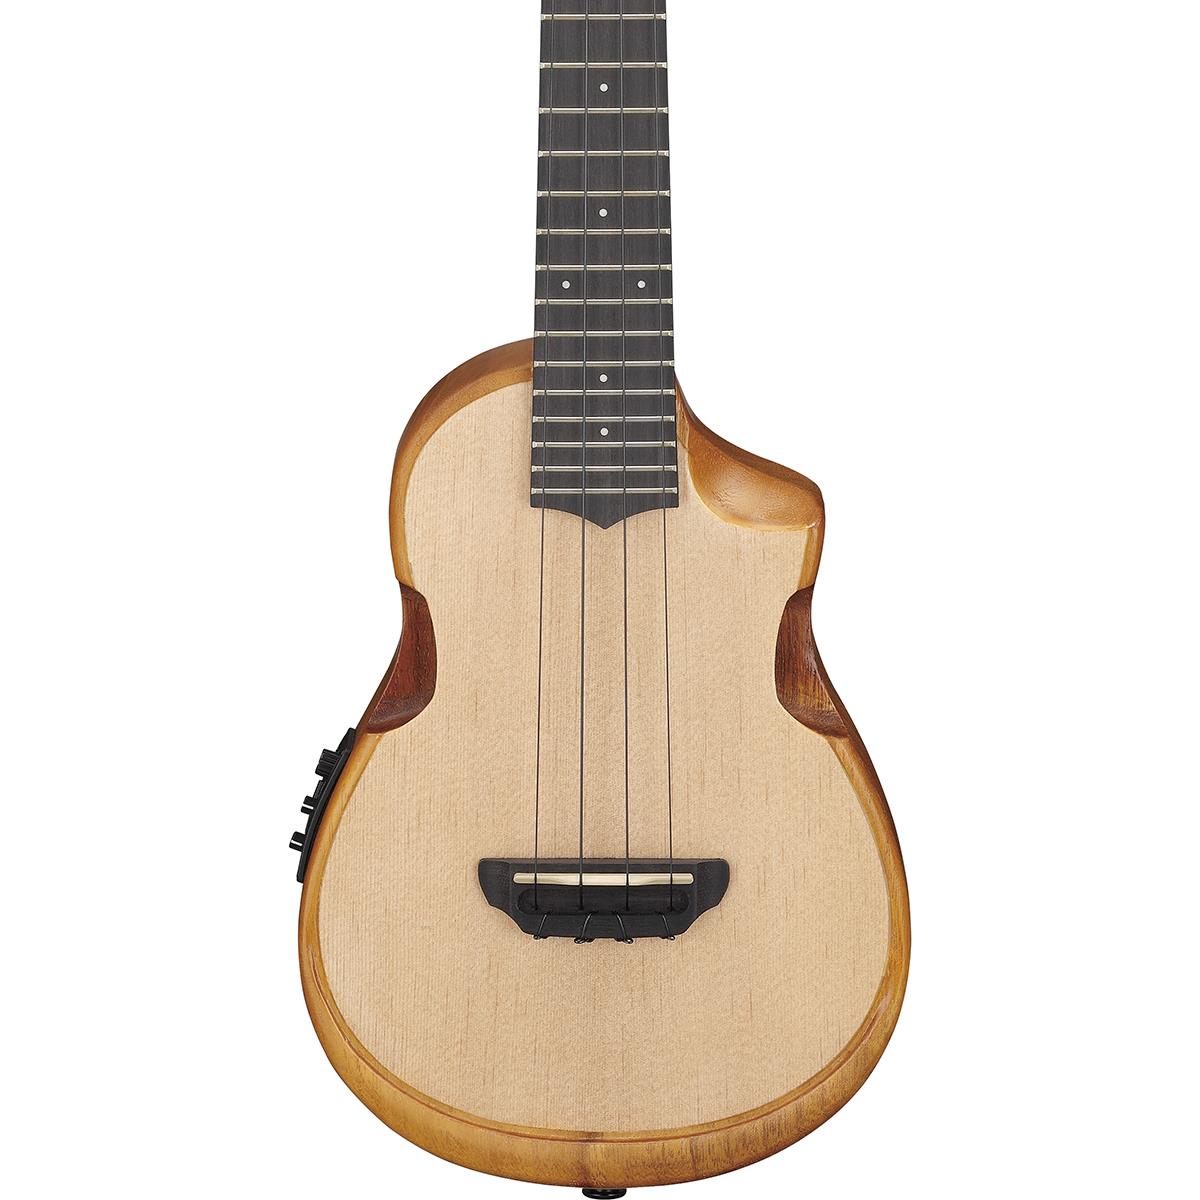 Ibanez AUC10E Acoustic-Electric Concert Ukulele with Bag - Open Pore Natural | Zoso Music Sdn Bhd